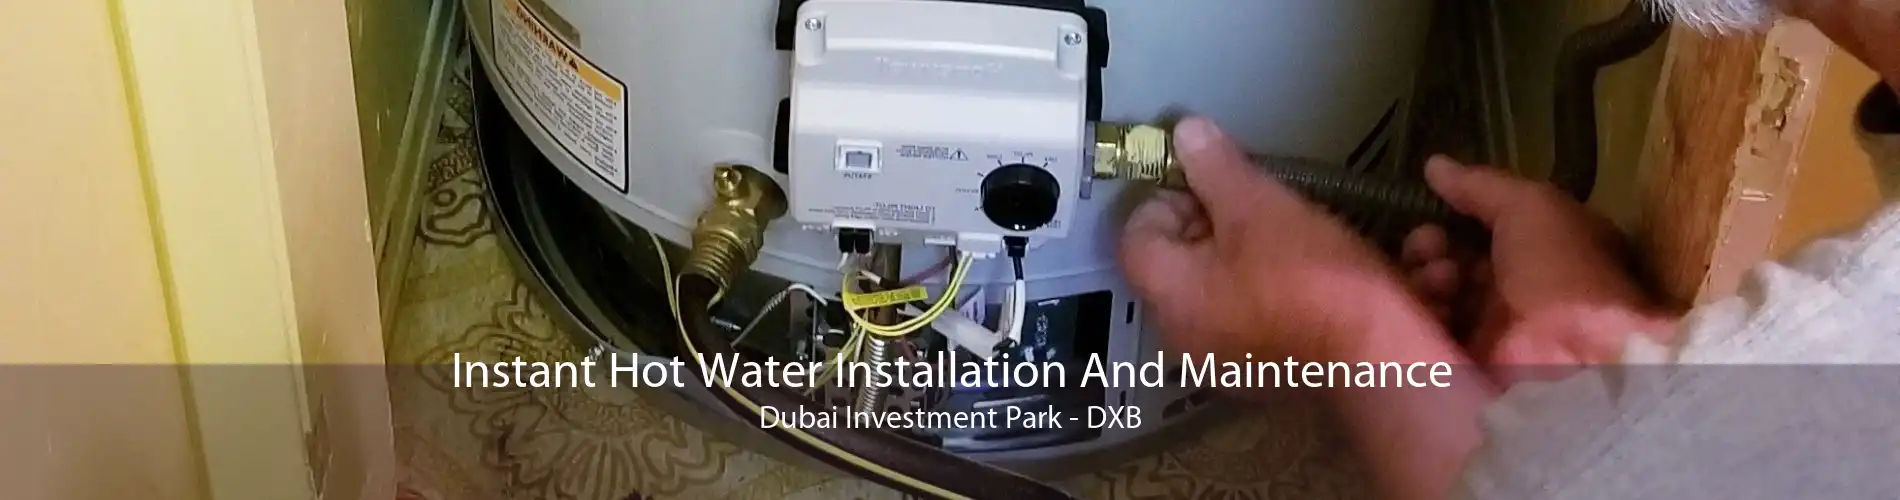 Instant Hot Water Installation And Maintenance Dubai Investment Park - DXB